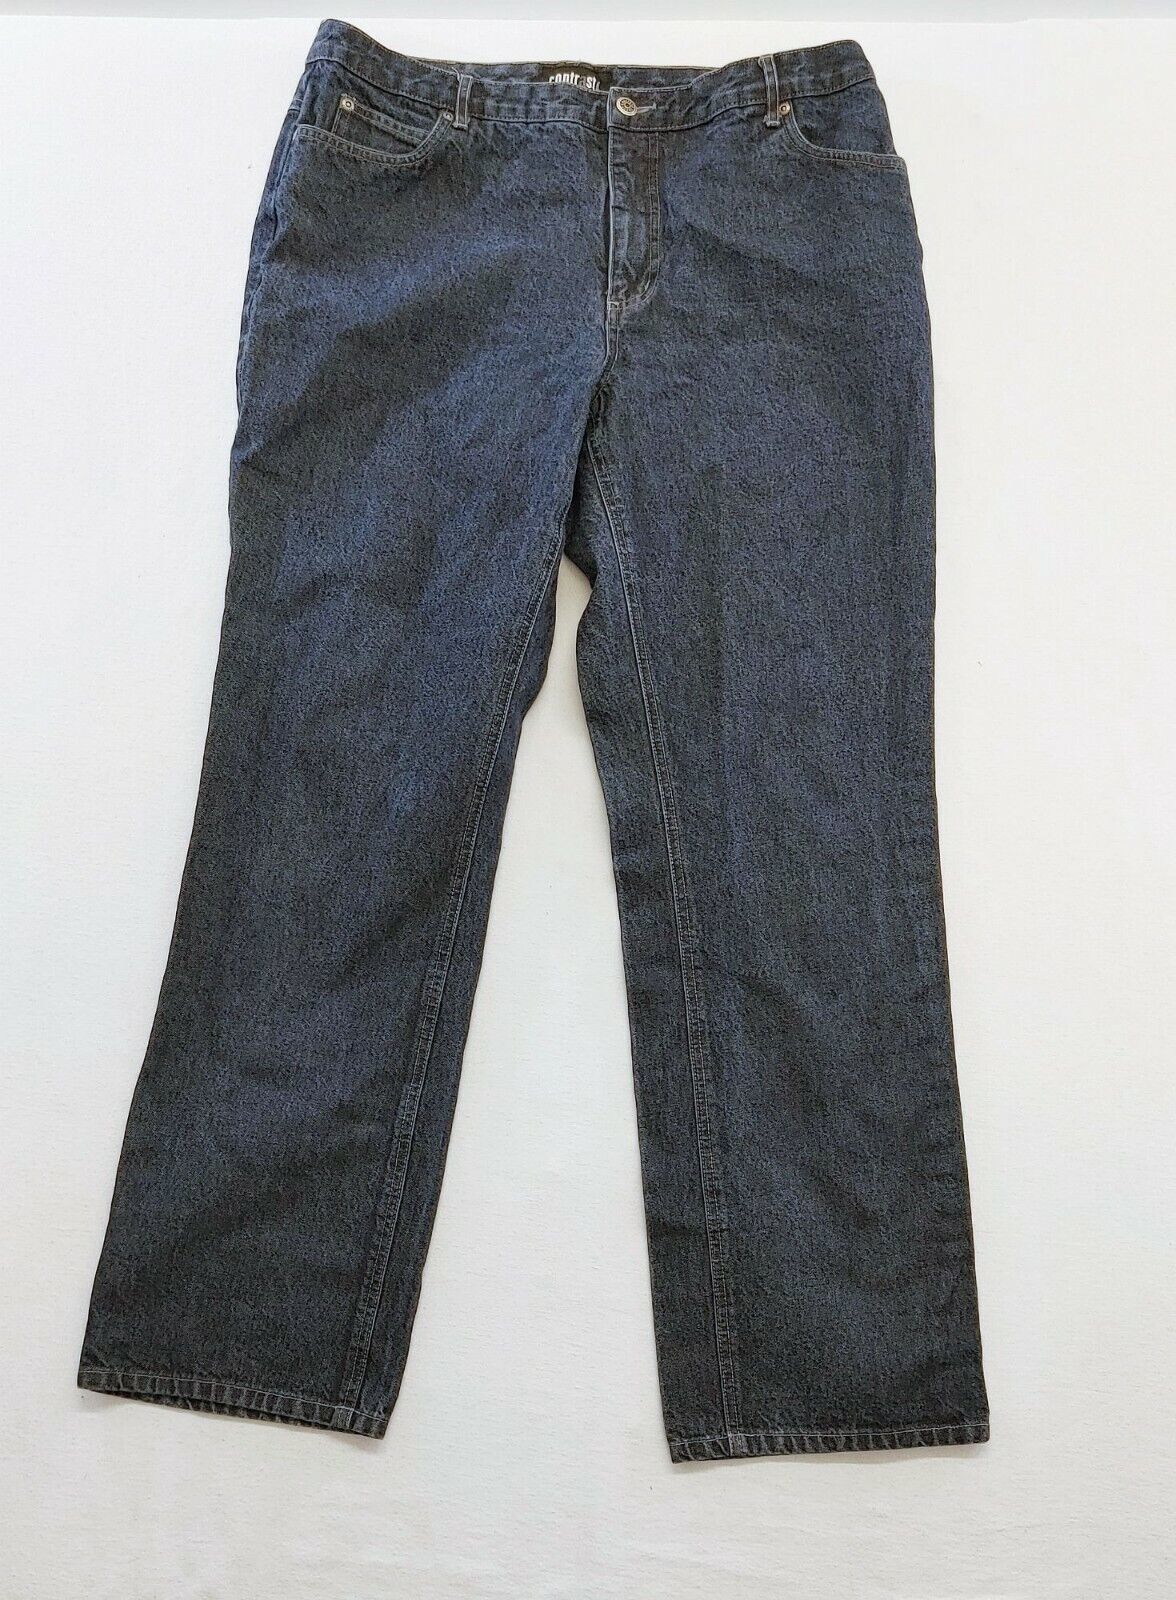 Primary image for Contrast Women's Straight Leg Blue Jeans Size 15 Cotton High Rise Denim